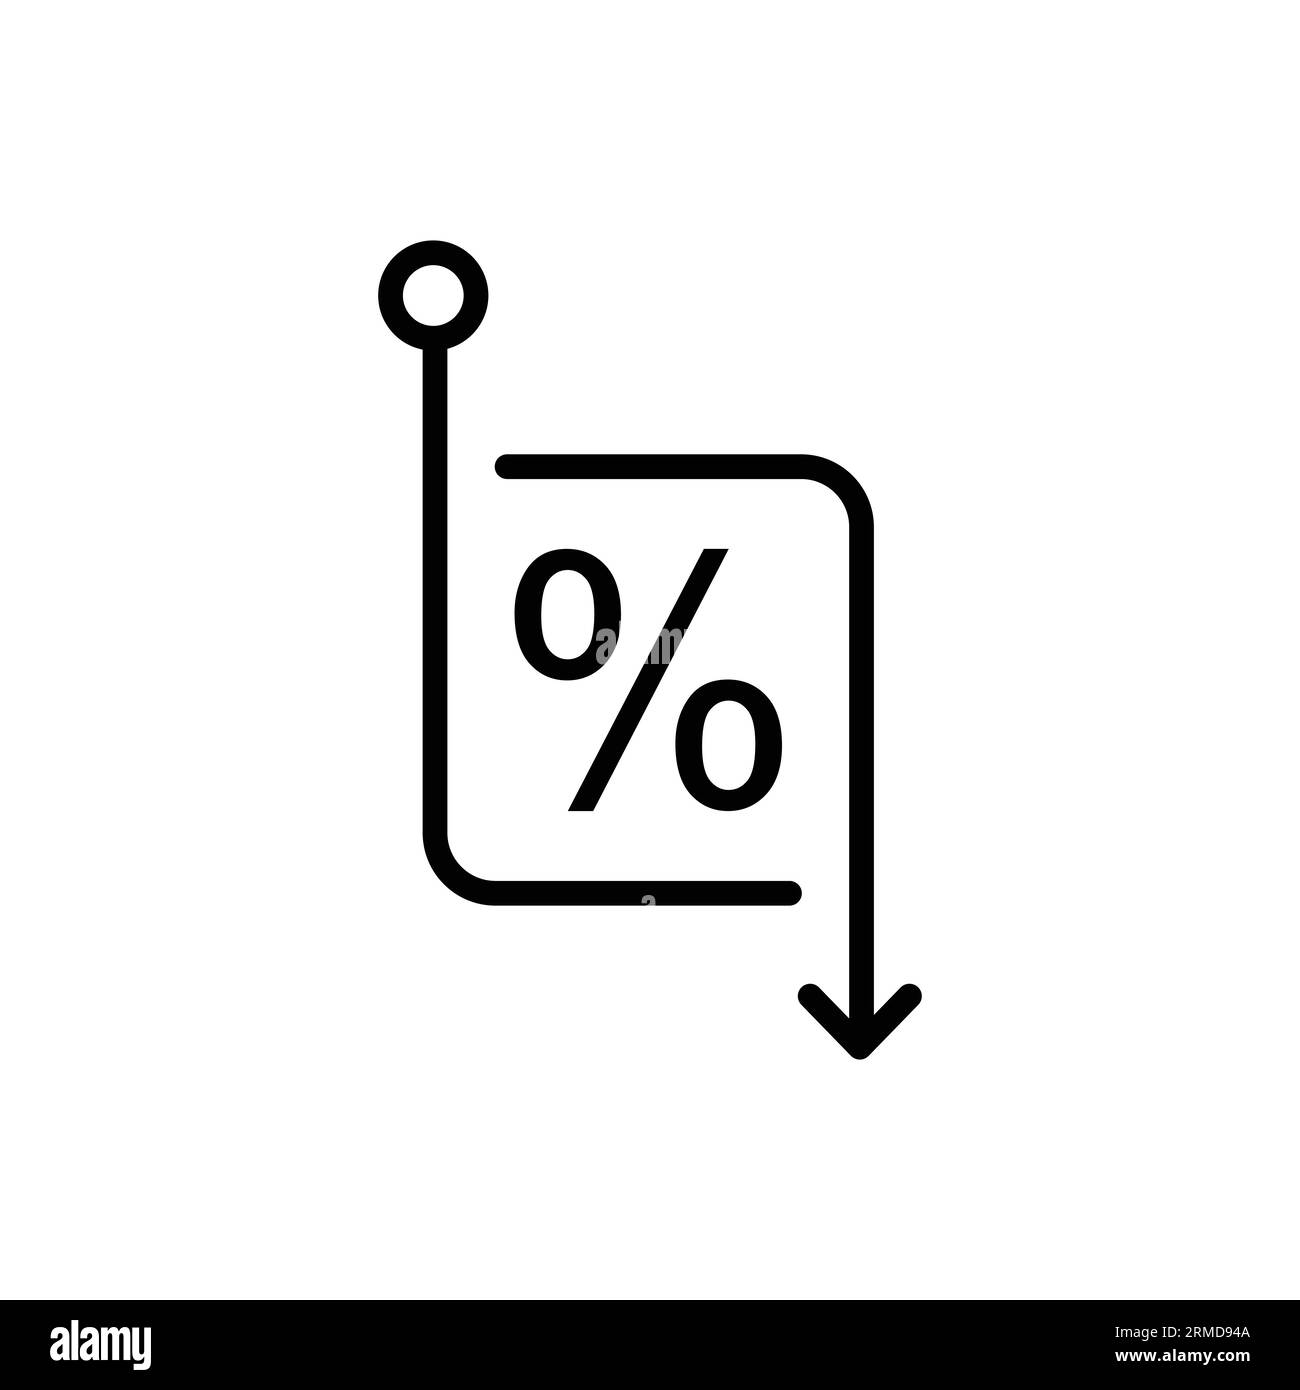 simple percent decline or low cost price icon. concept of debt sign or recession. simple style trend modern business or gdp logotype graphic art desig Stock Vector